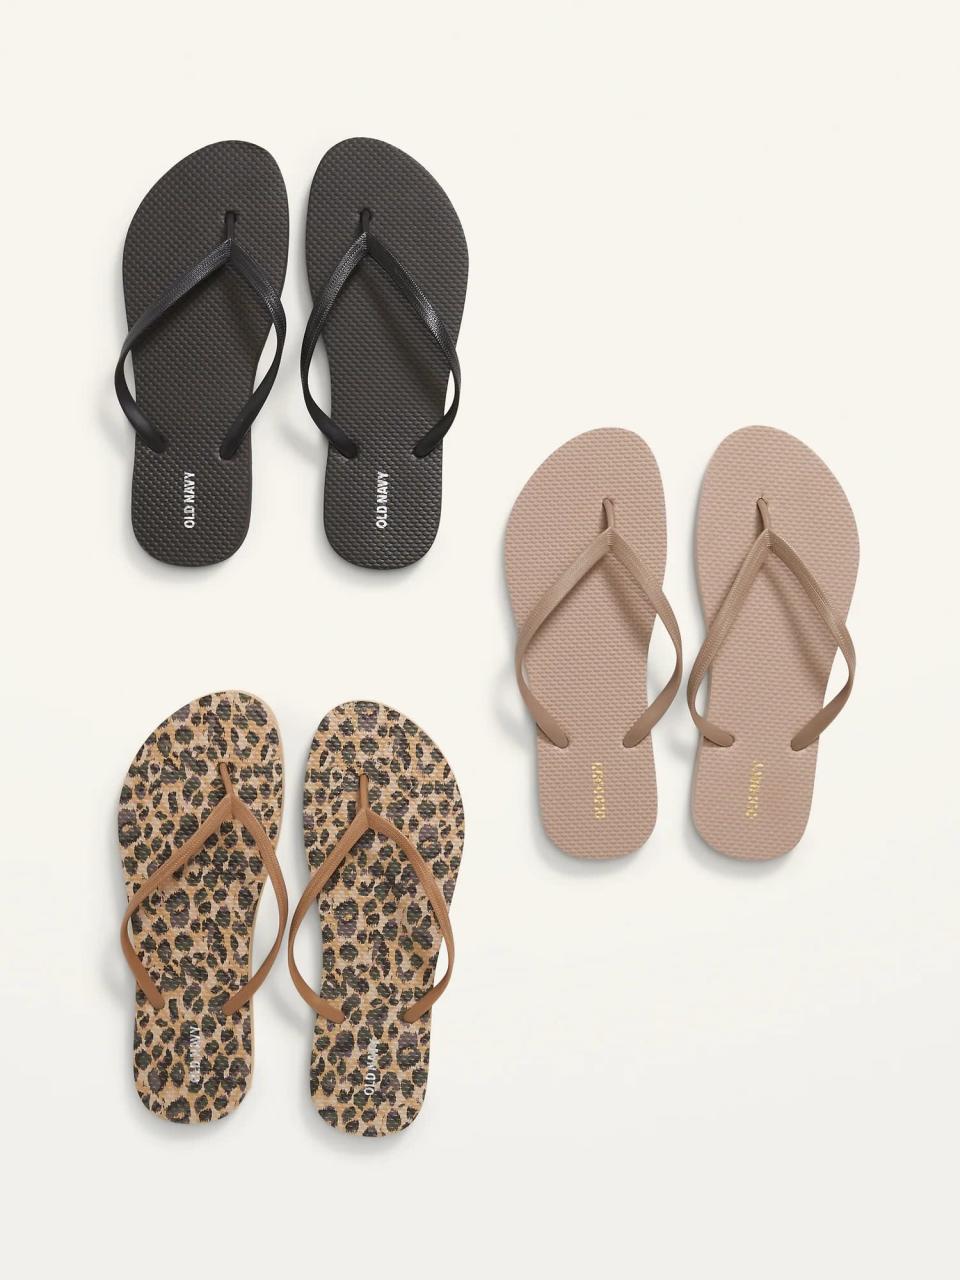 <p>If you're obsessed with Old Navy's staple flip-flops like we are, stock up on them with this <span>Sugarcane-Blend Flip-Flop Sandals 3-Pack</span> ($10, originally $13). Made partially from renewable sugarcane, these flip-flops are stylish, dependable, and durable. The three packs come in a variety of prints and patterns. </p>